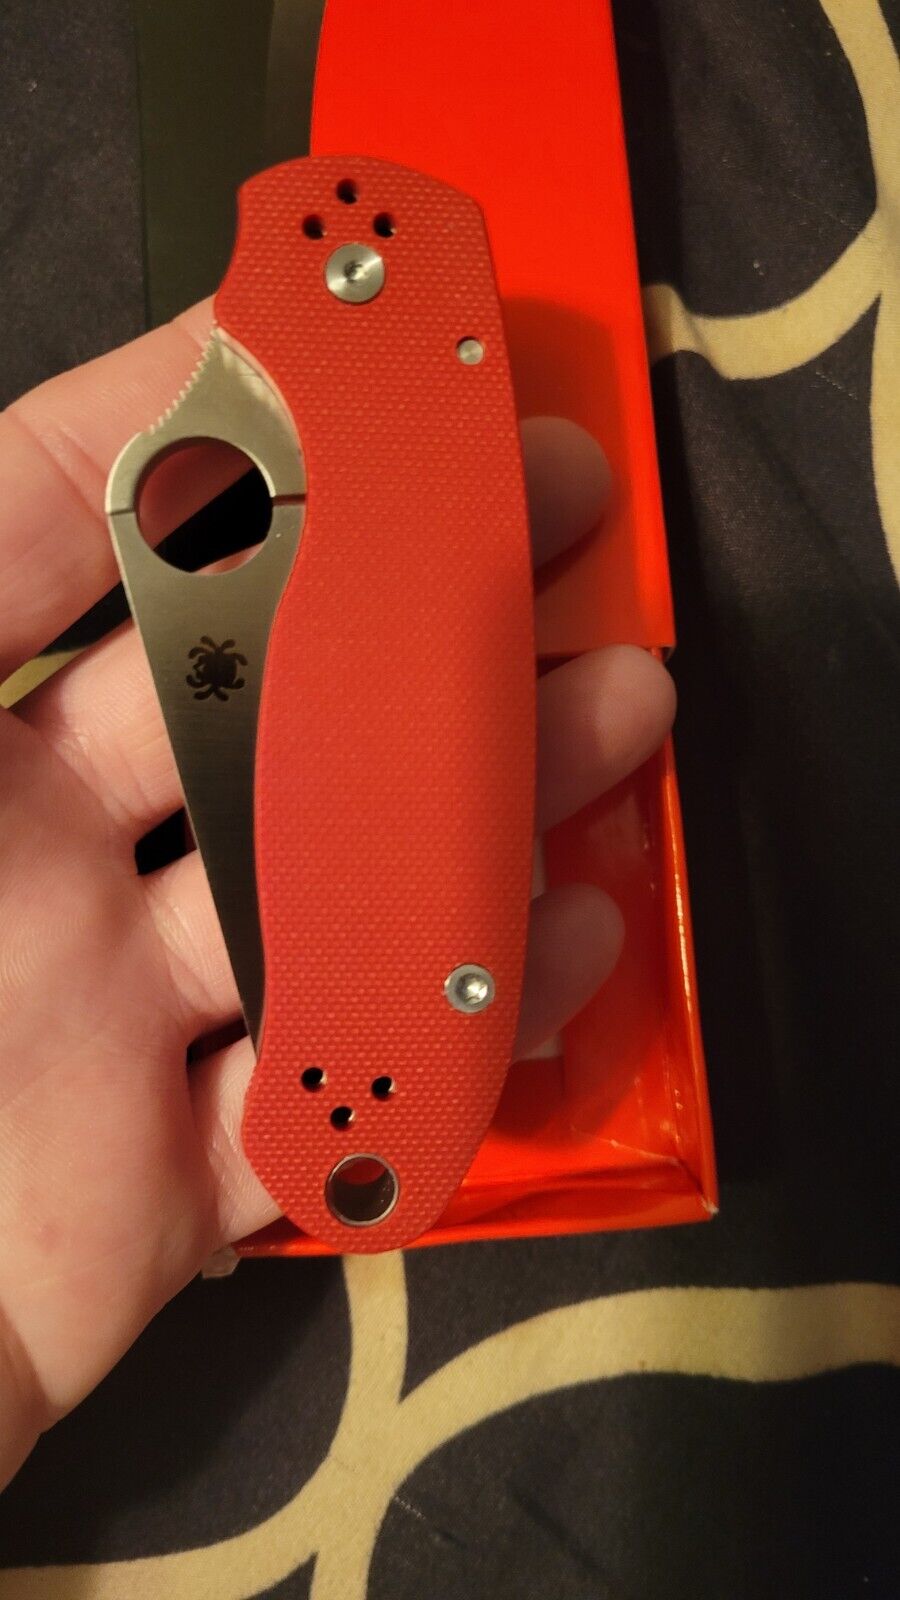 Spyderco Style Knife. Made In China. 